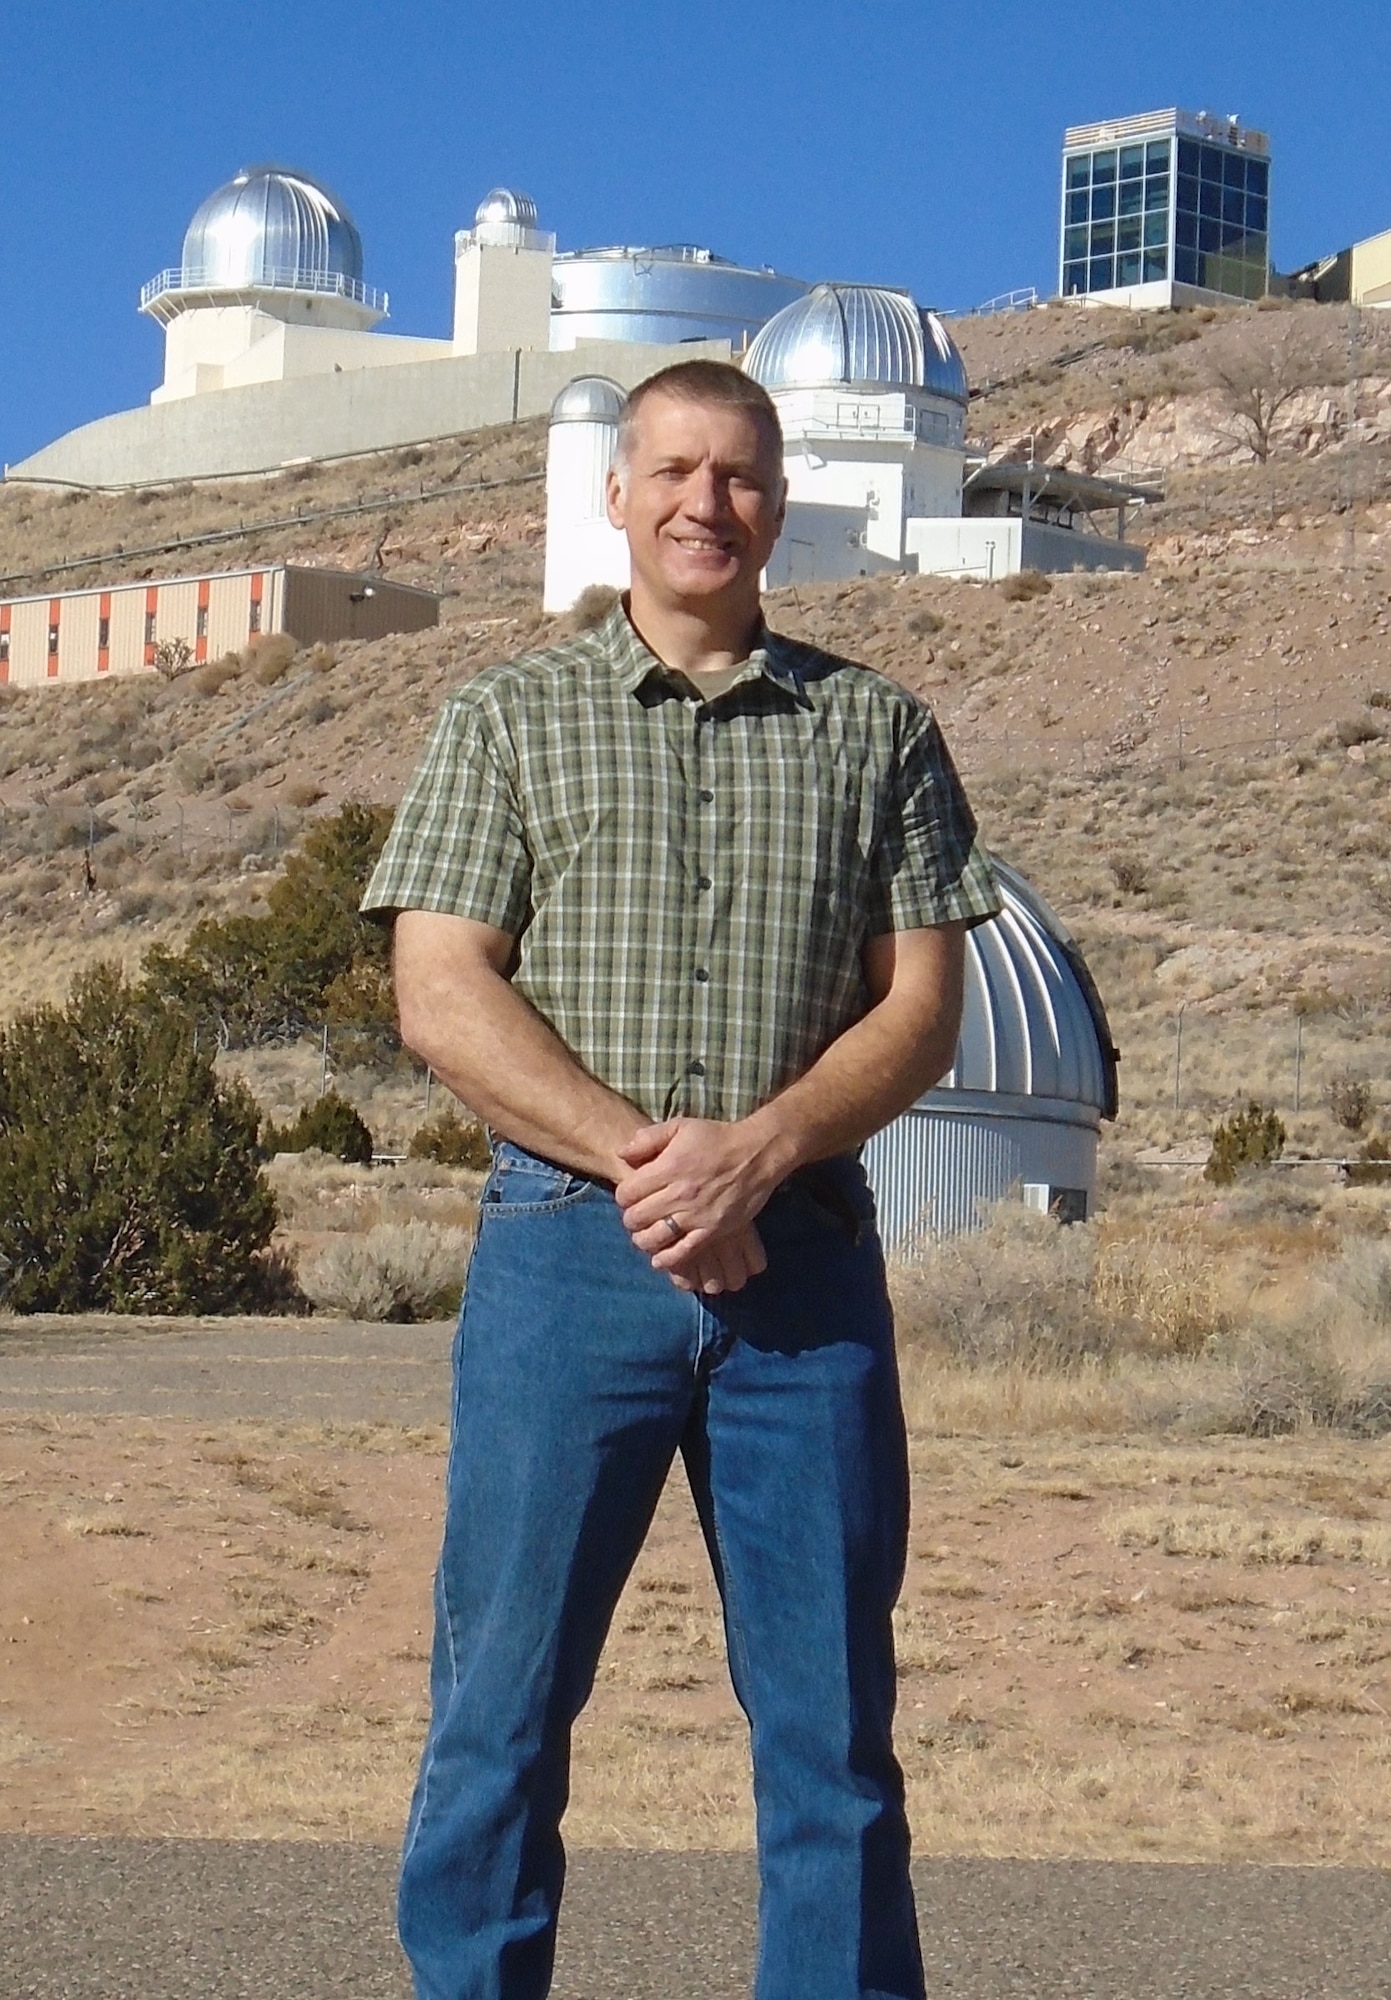 Air Force Research Laboratory senior engineer Dr. Odell Reynolds with AFRL’s Starfire Optical Range telescopes in the background. Odell recorded an image of the asteroid Kalliope and its natural satellite Linus, using AFRL’s1.5 meter telescope on November 29, 2021 – a surprising achievement based on the small diameter of the telescope. (U.S. Air Force photo/Benjamin Herrera)